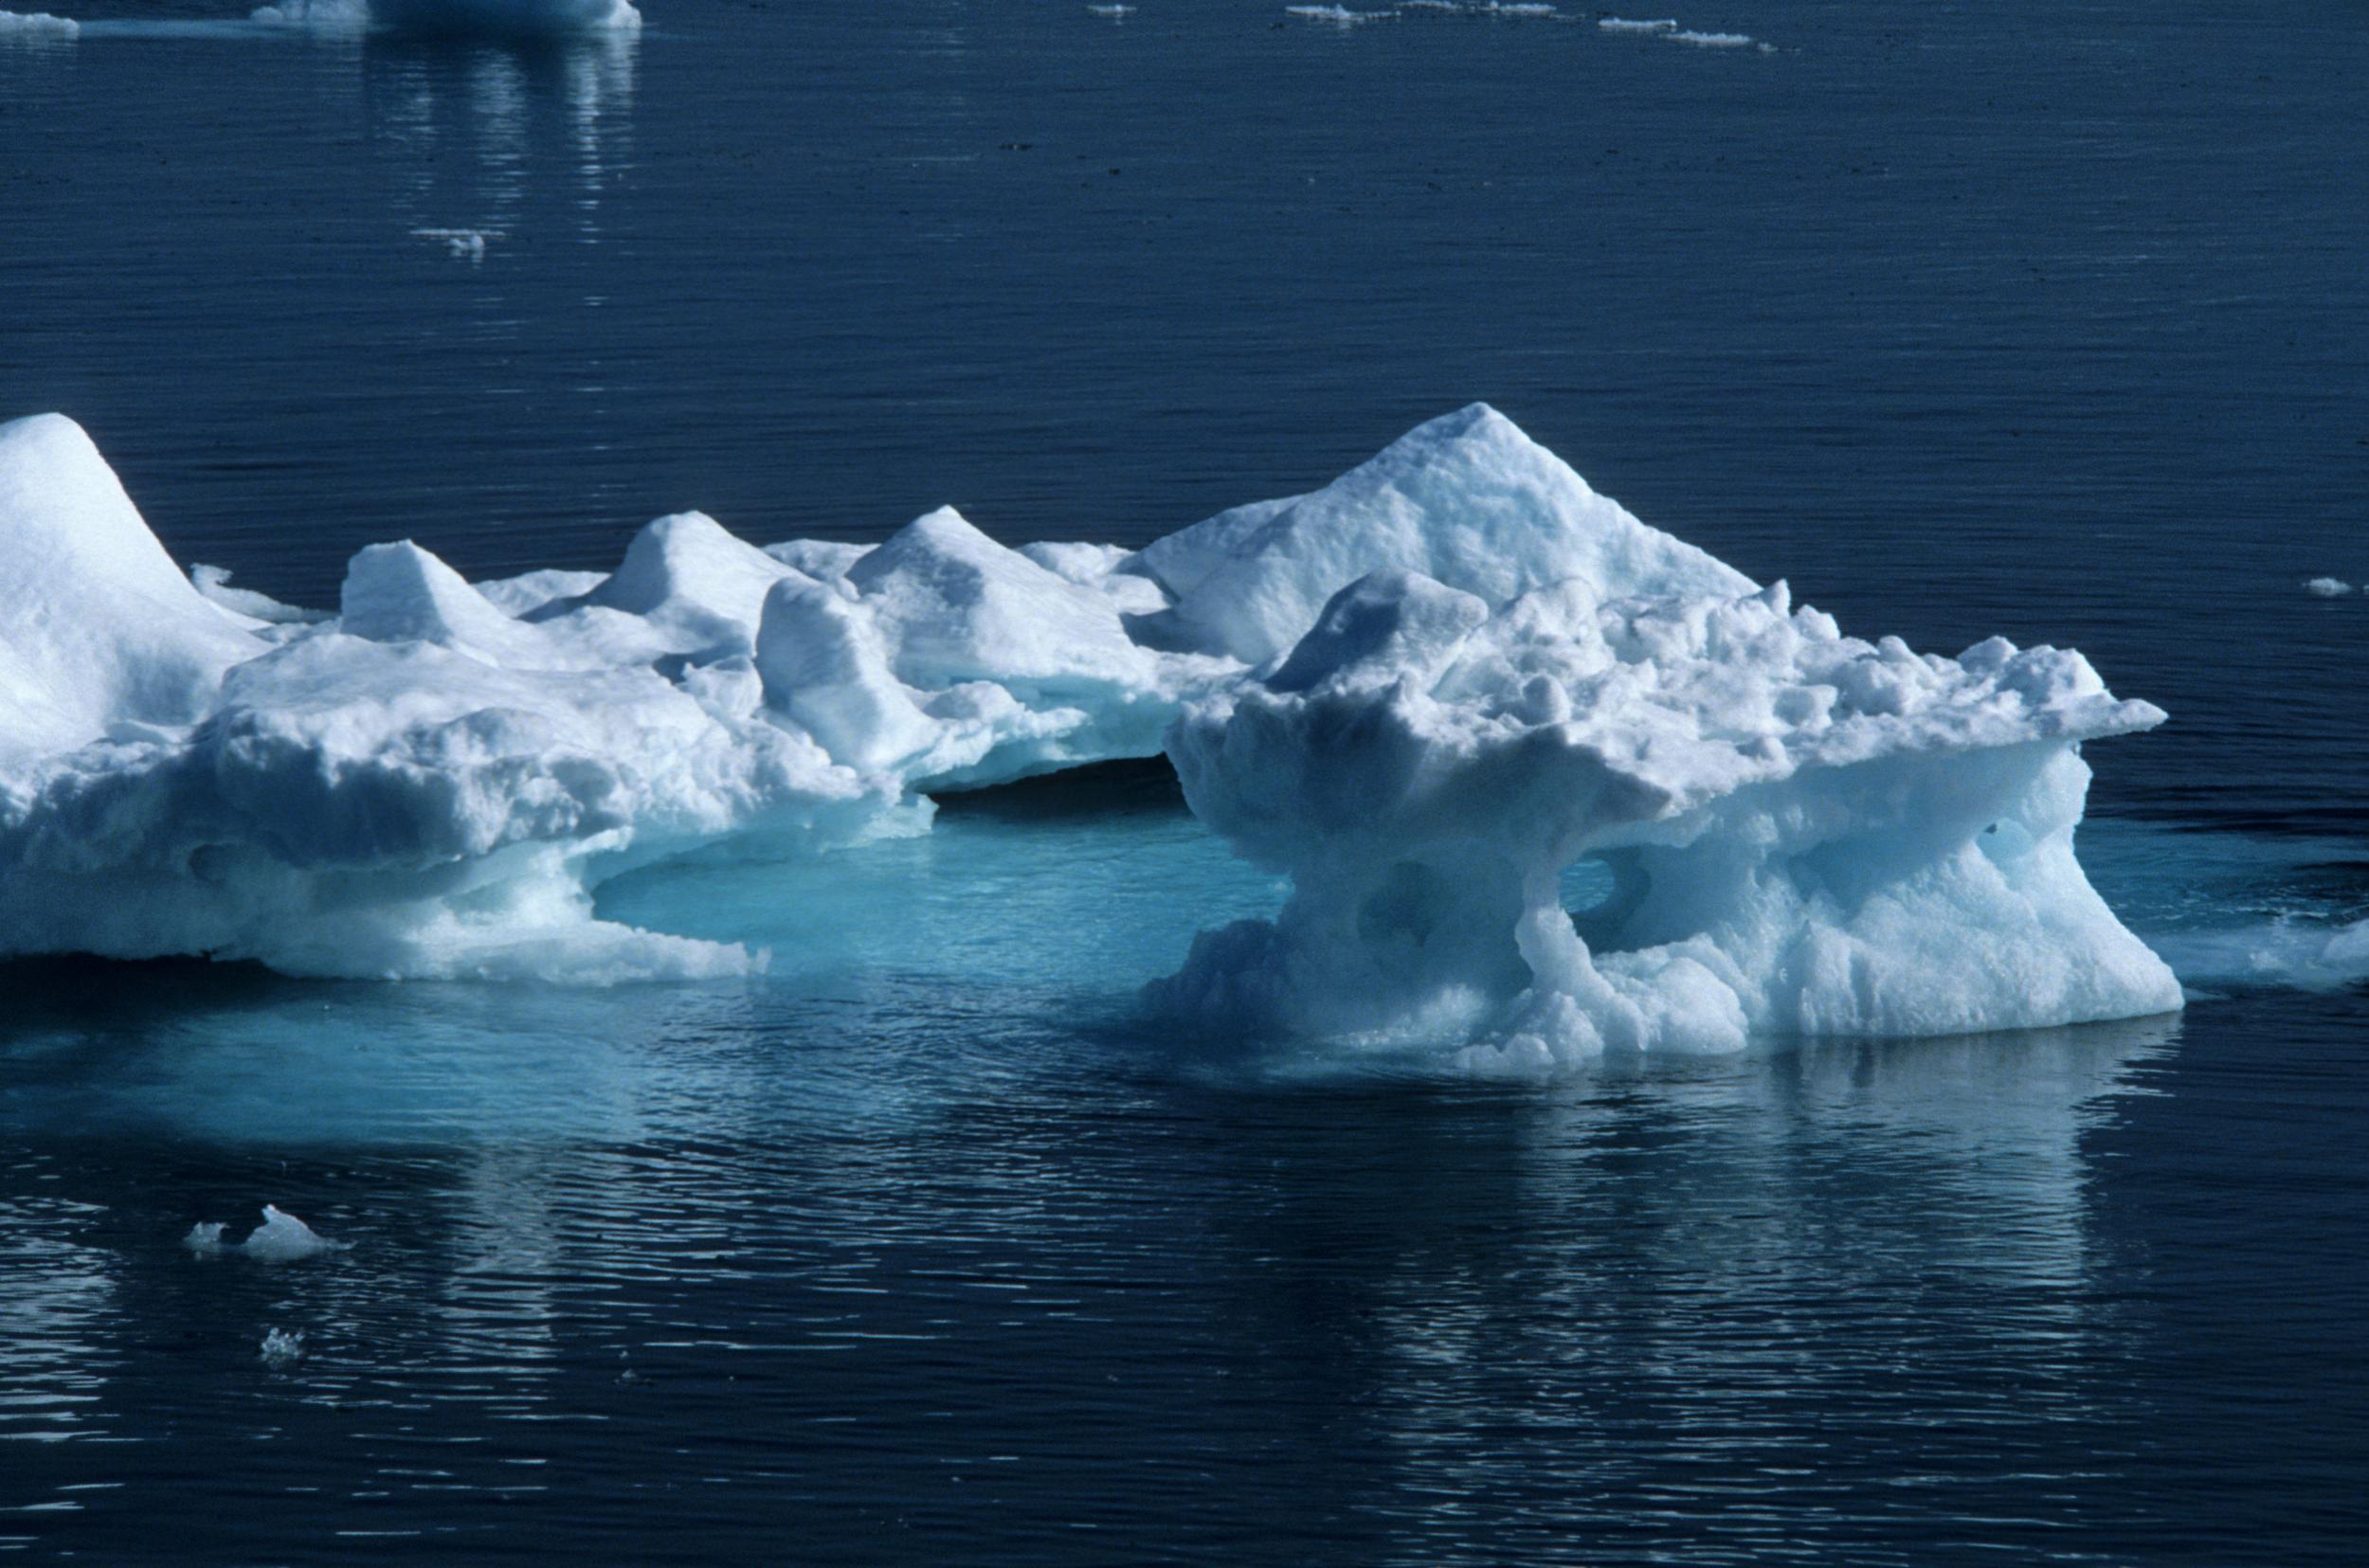 At the current rate of ice decline, it will become feasible to extract Arctic resources by around 2040